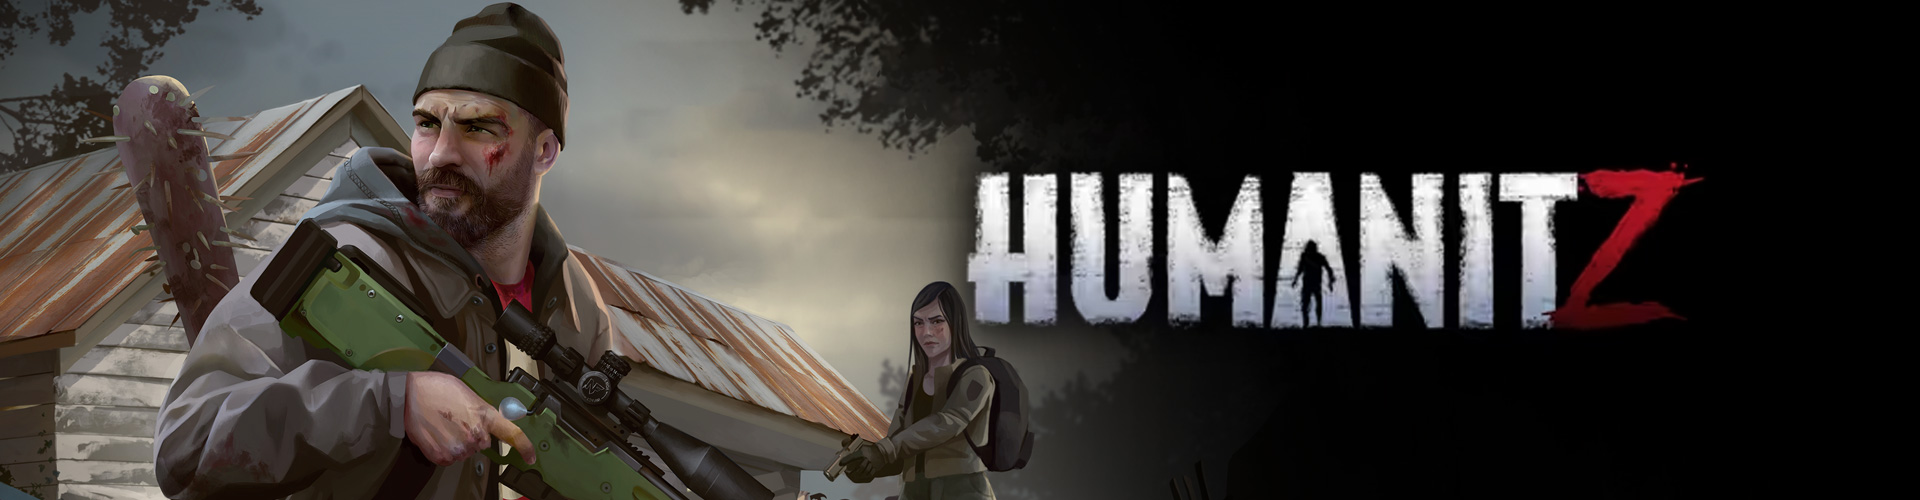 HumanitZ: a survival horror game against zombies